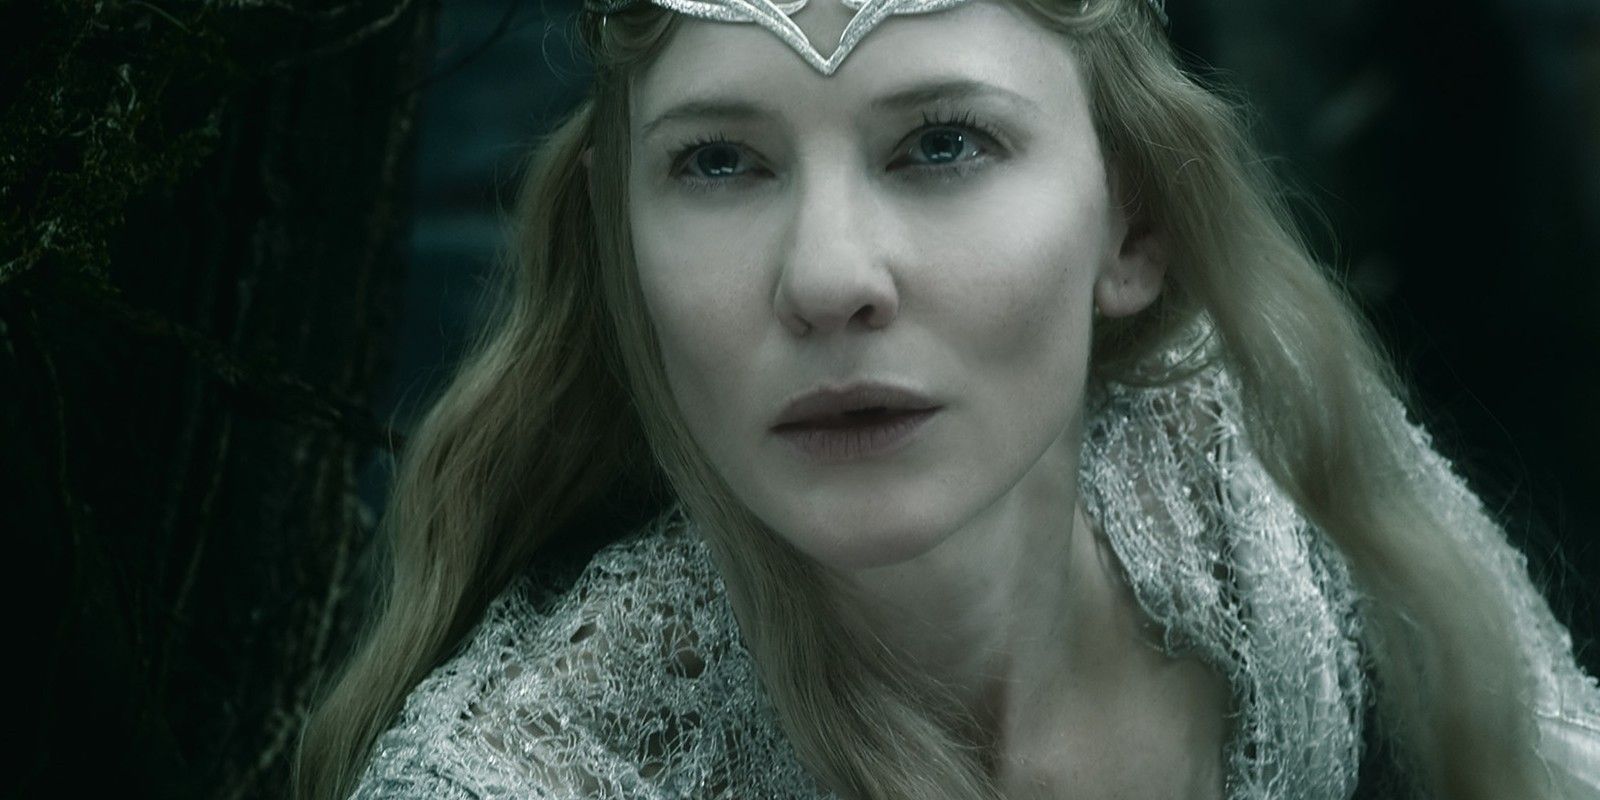 Cate Blanchett preparing to fight in The Hobbit Battle of the Five Armies